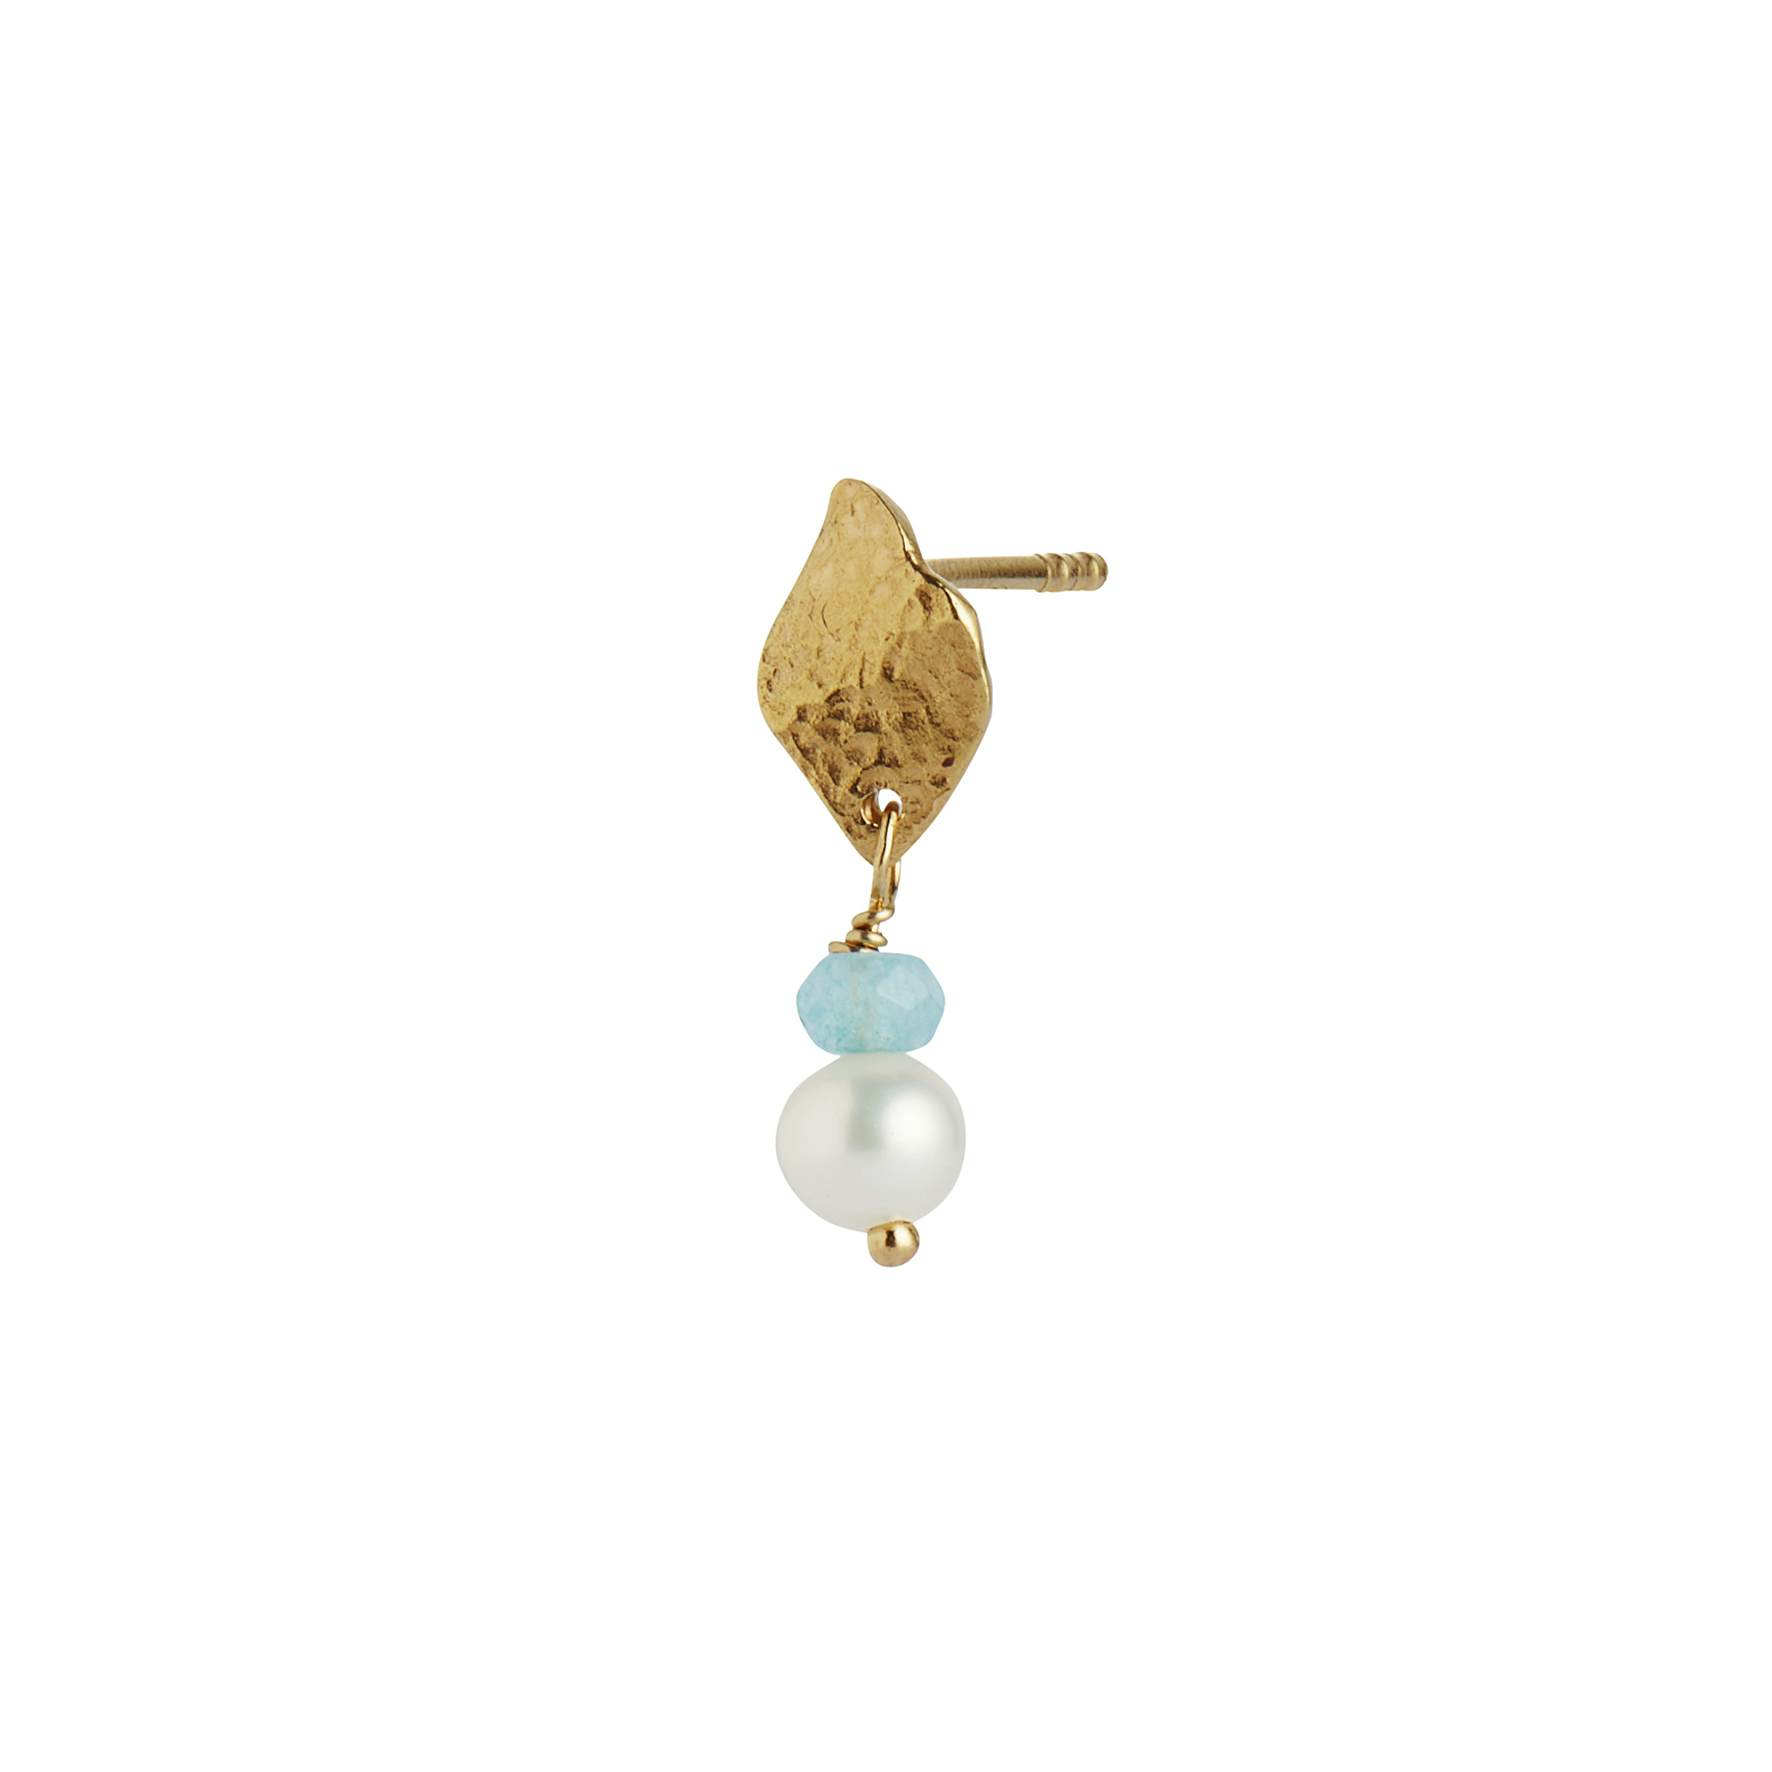 Ile De L'Amour with Pearl and Light Blue Topaz Earring fra STINE A Jewelry i Forgylt-Sølv Sterling 925